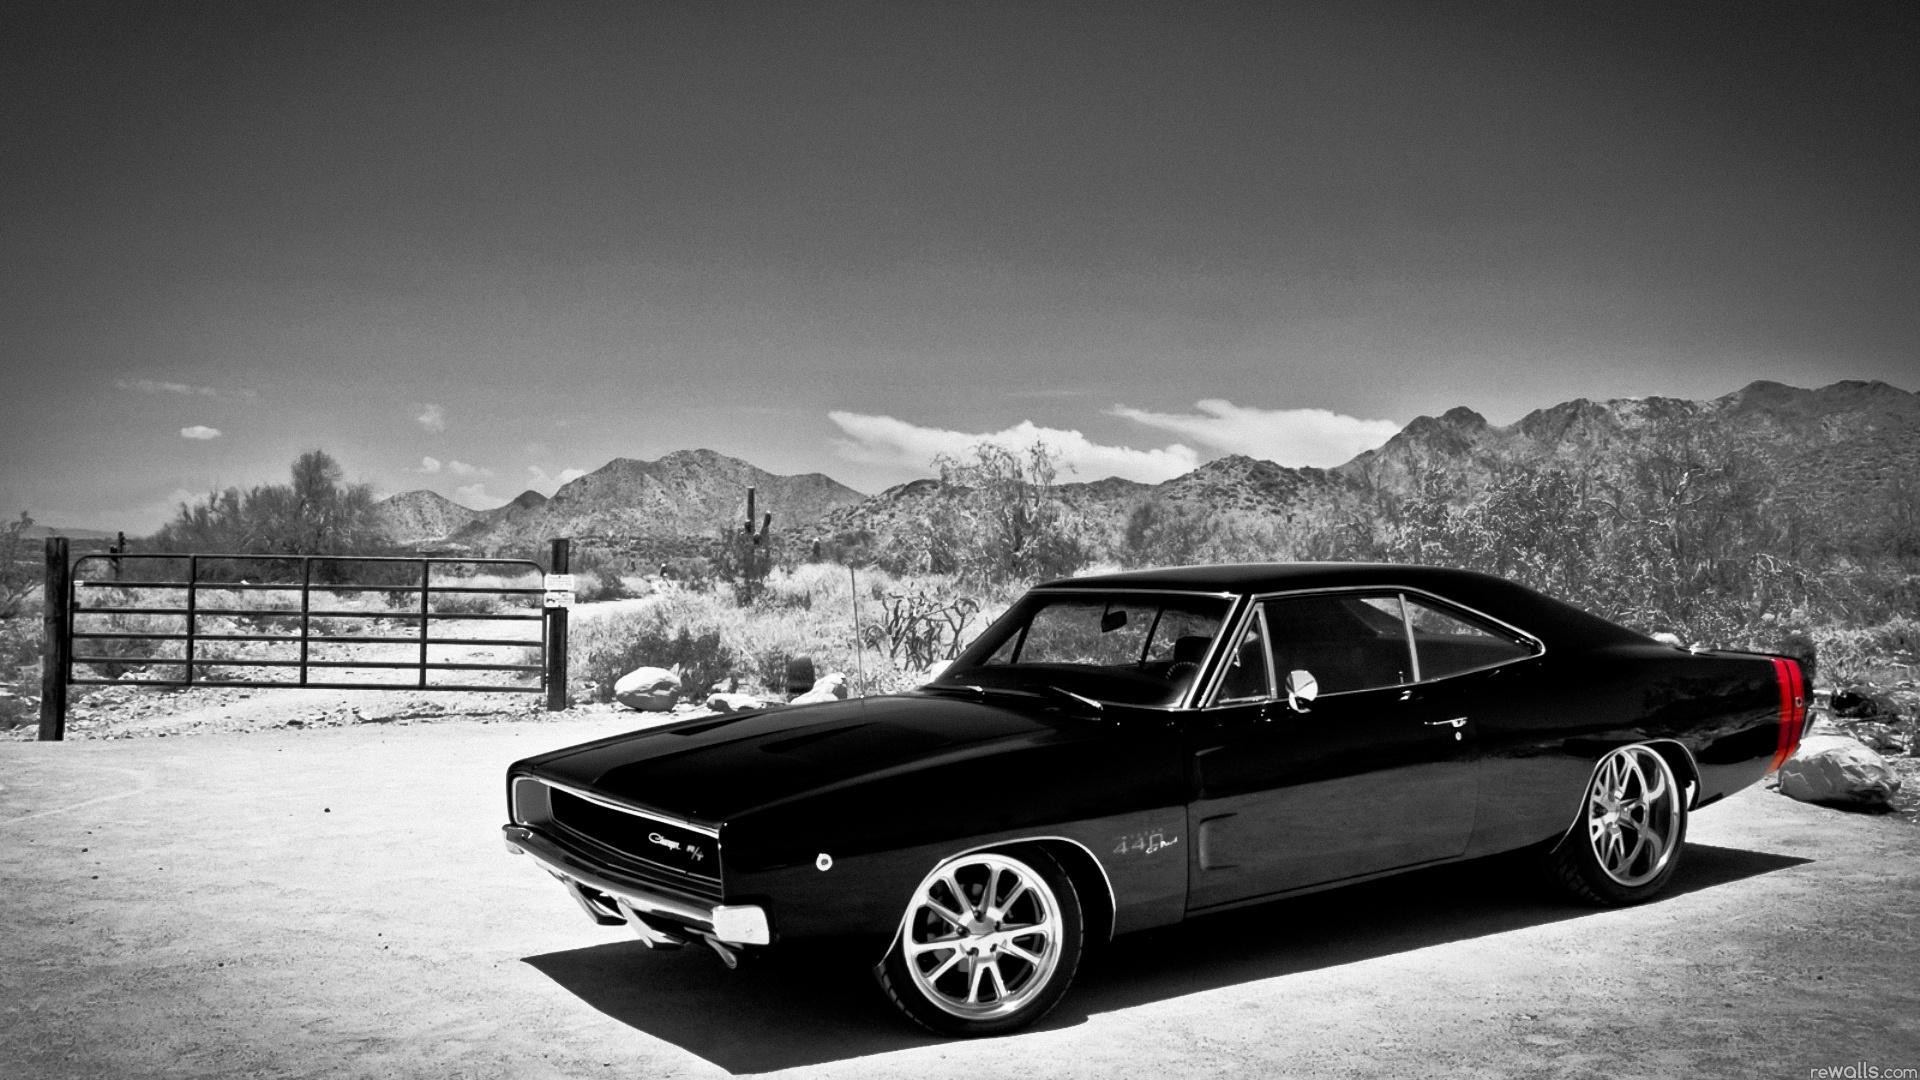 1920x1080 Dodge Charger Wallpapers | HD Wallpapers | Pinterest | Dodge charger, Dodge  and Hd wallpaper